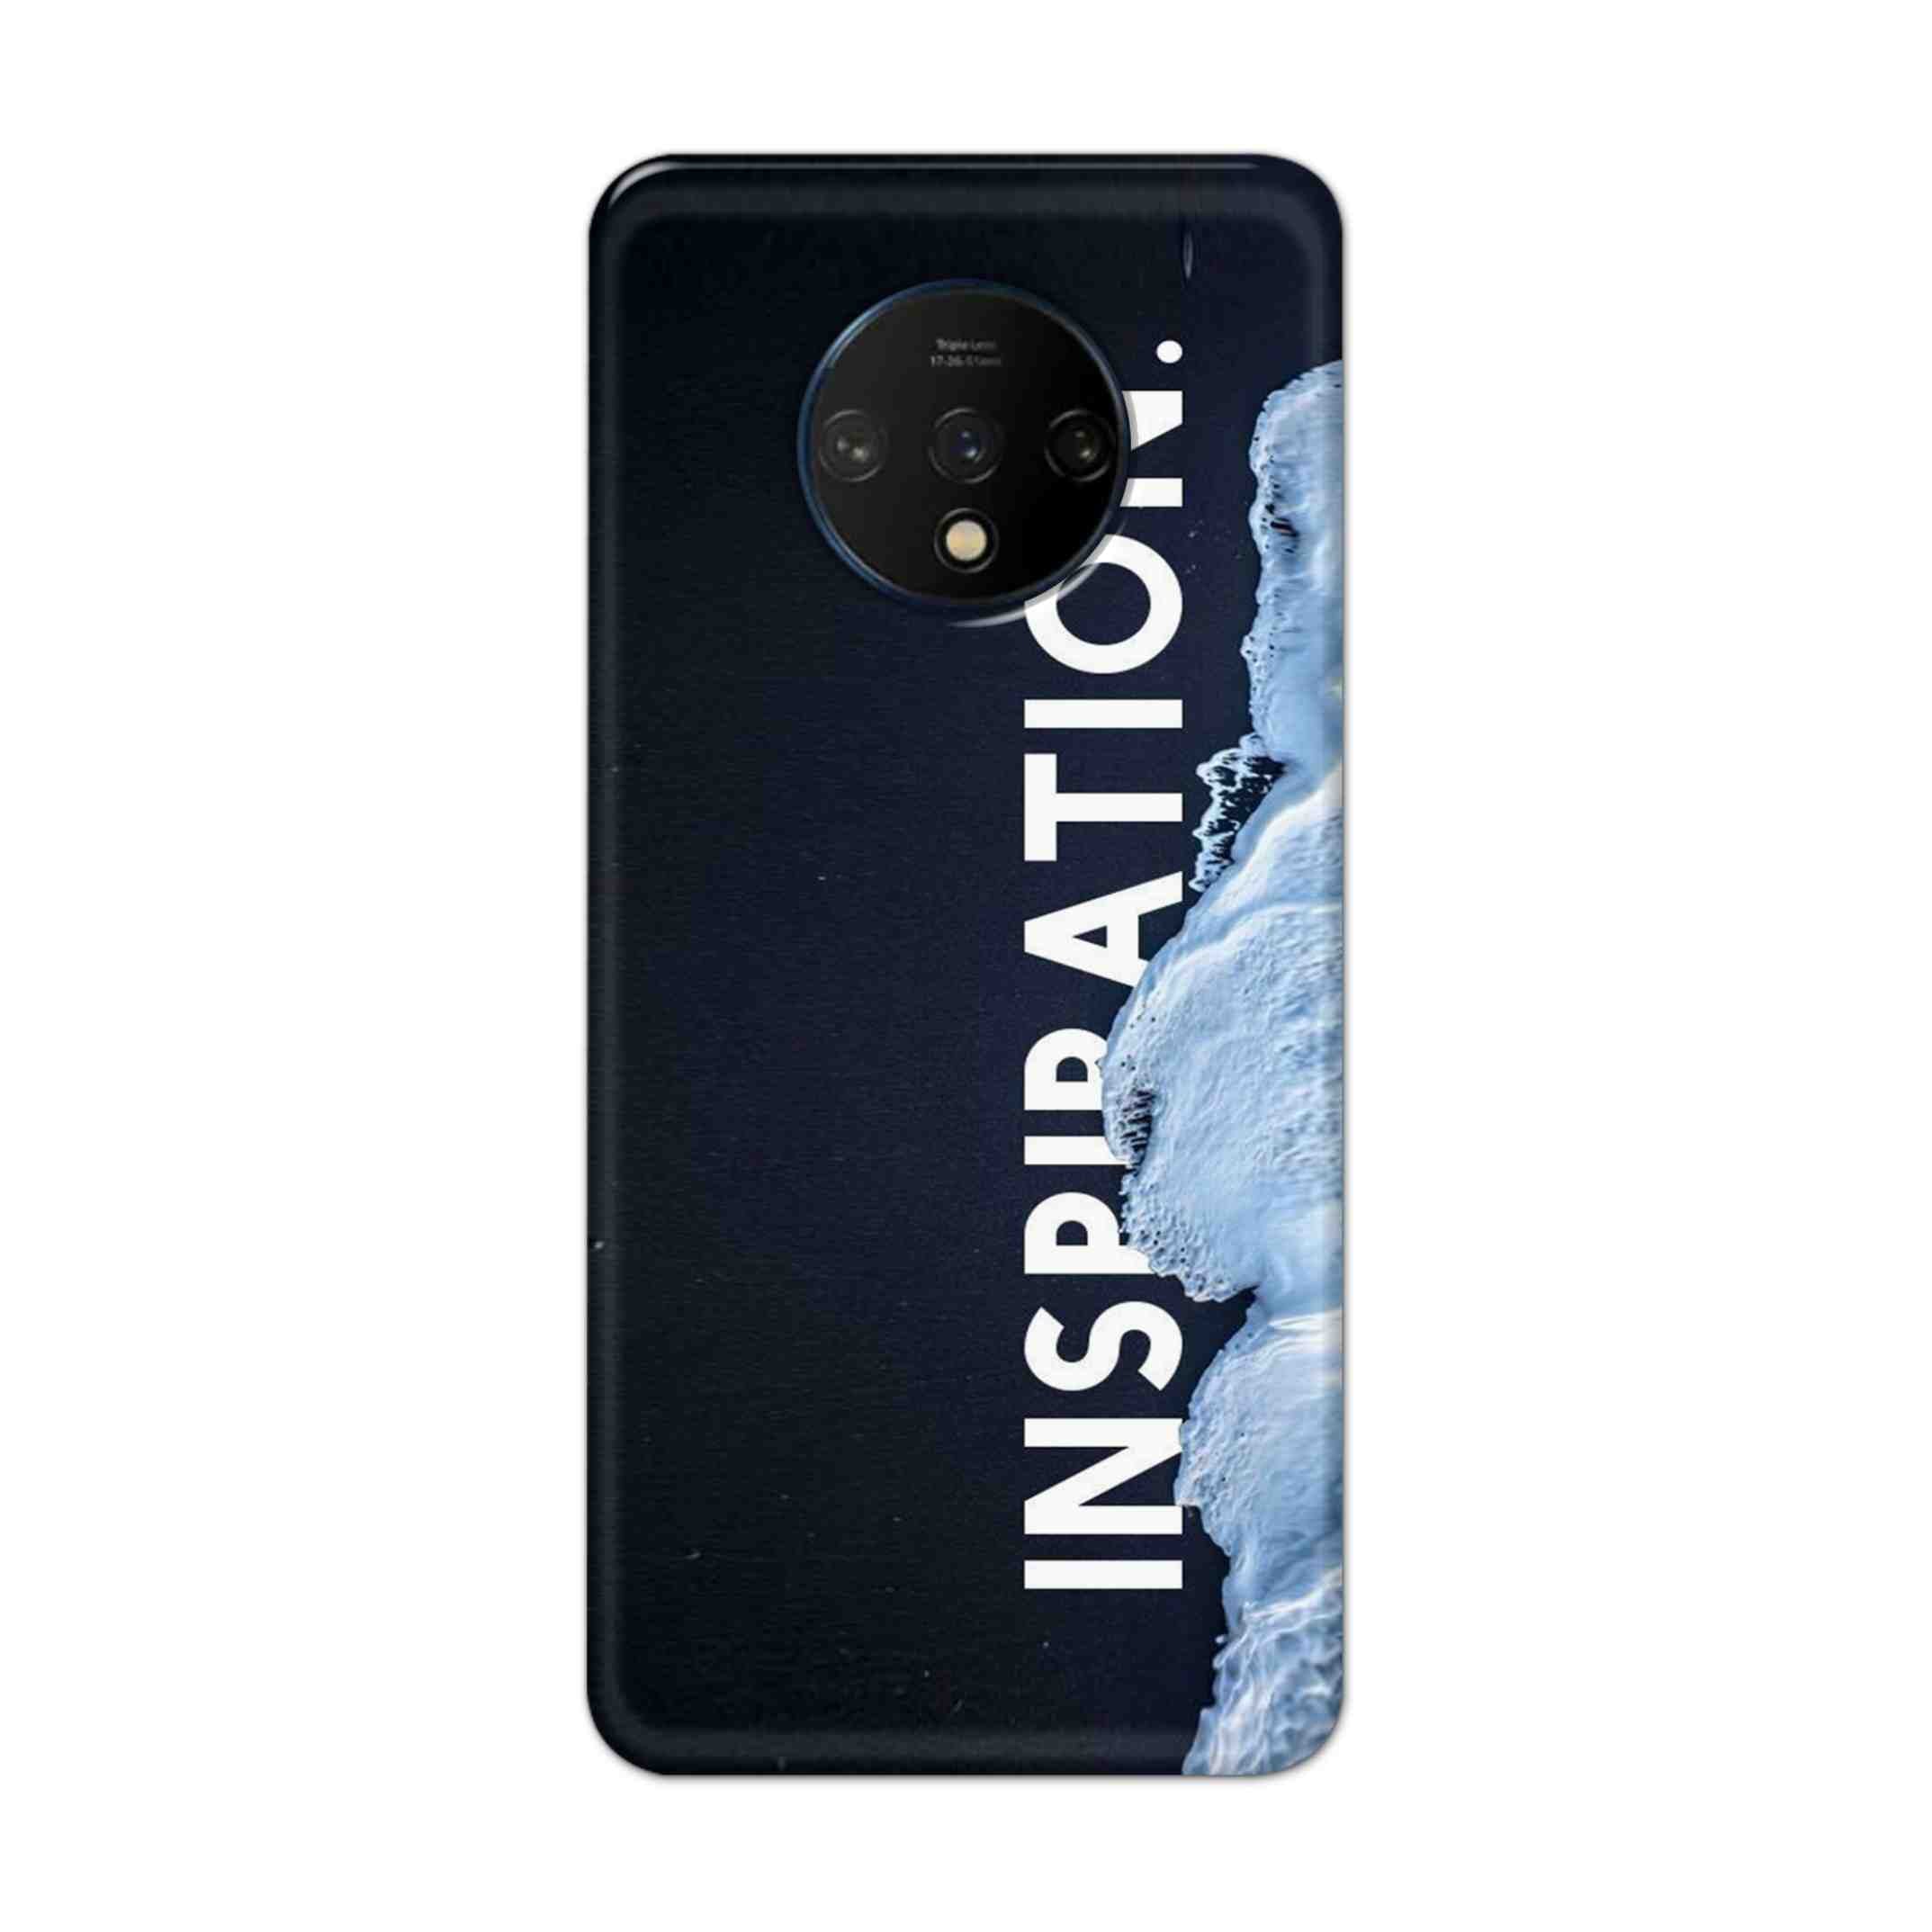 Buy Inspiration Hard Back Mobile Phone Case Cover For OnePlus 7T Online